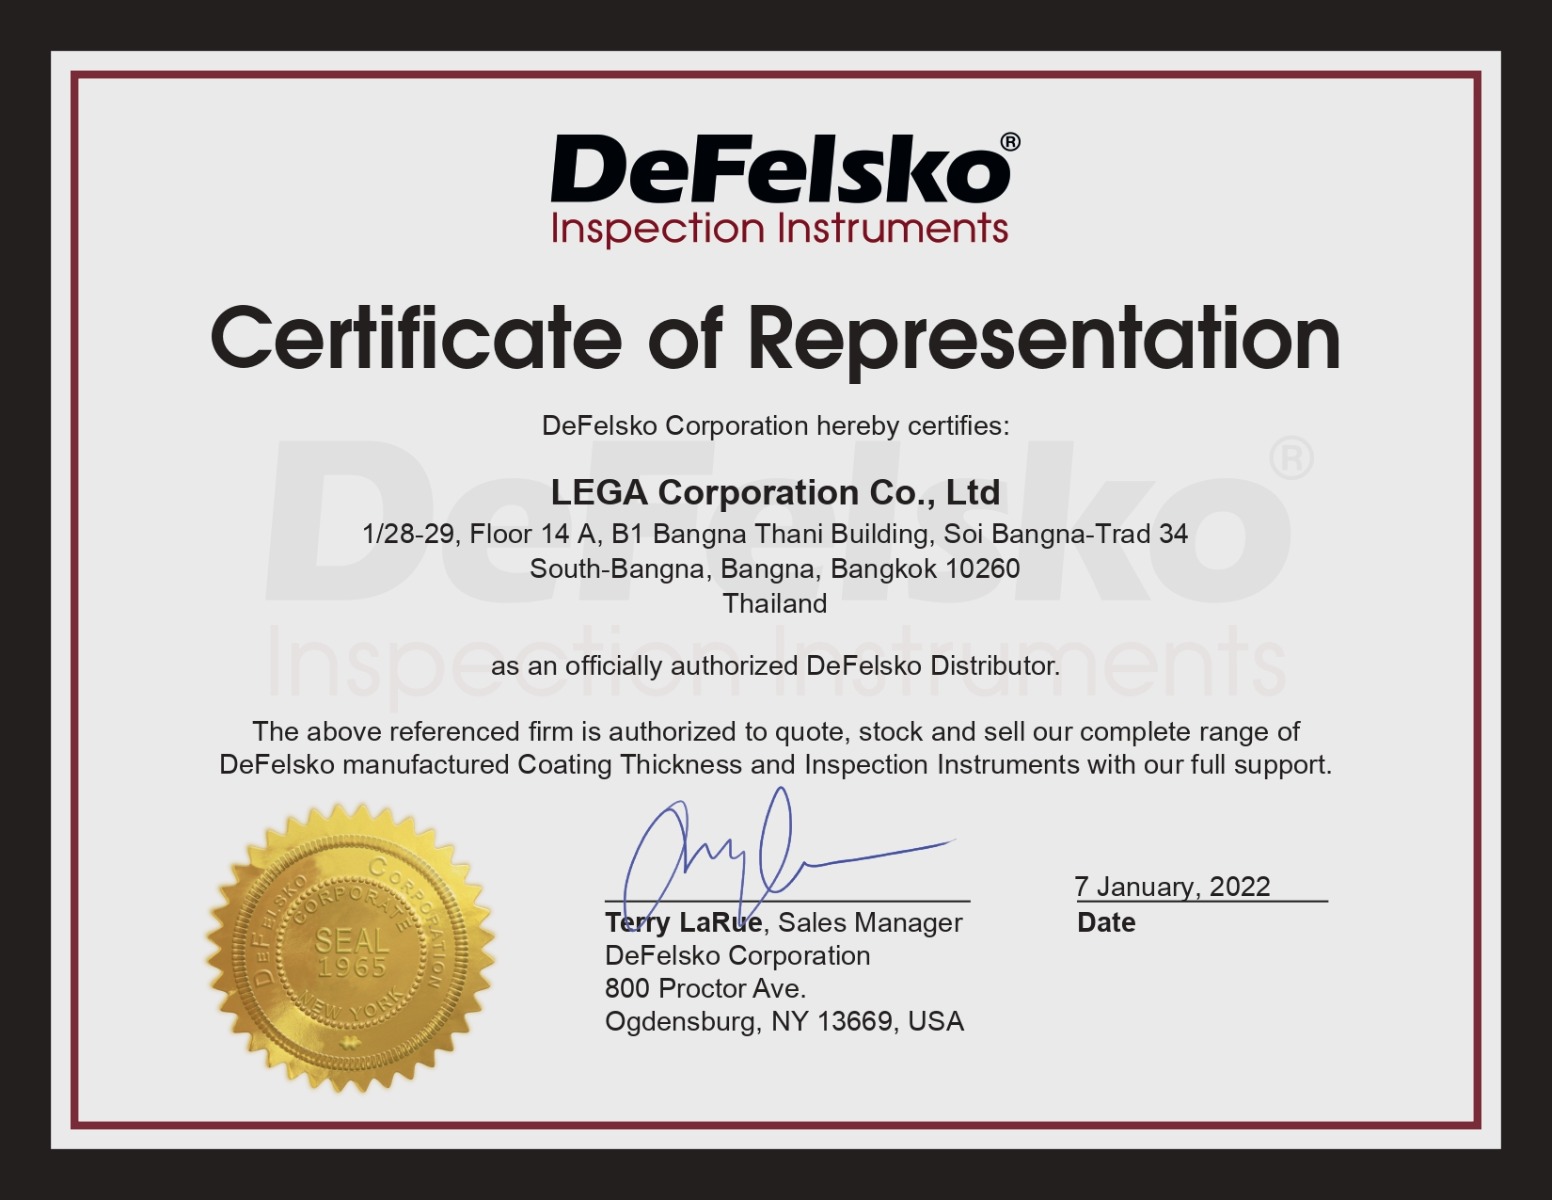 Officially Authorized DeFelsko Distributor